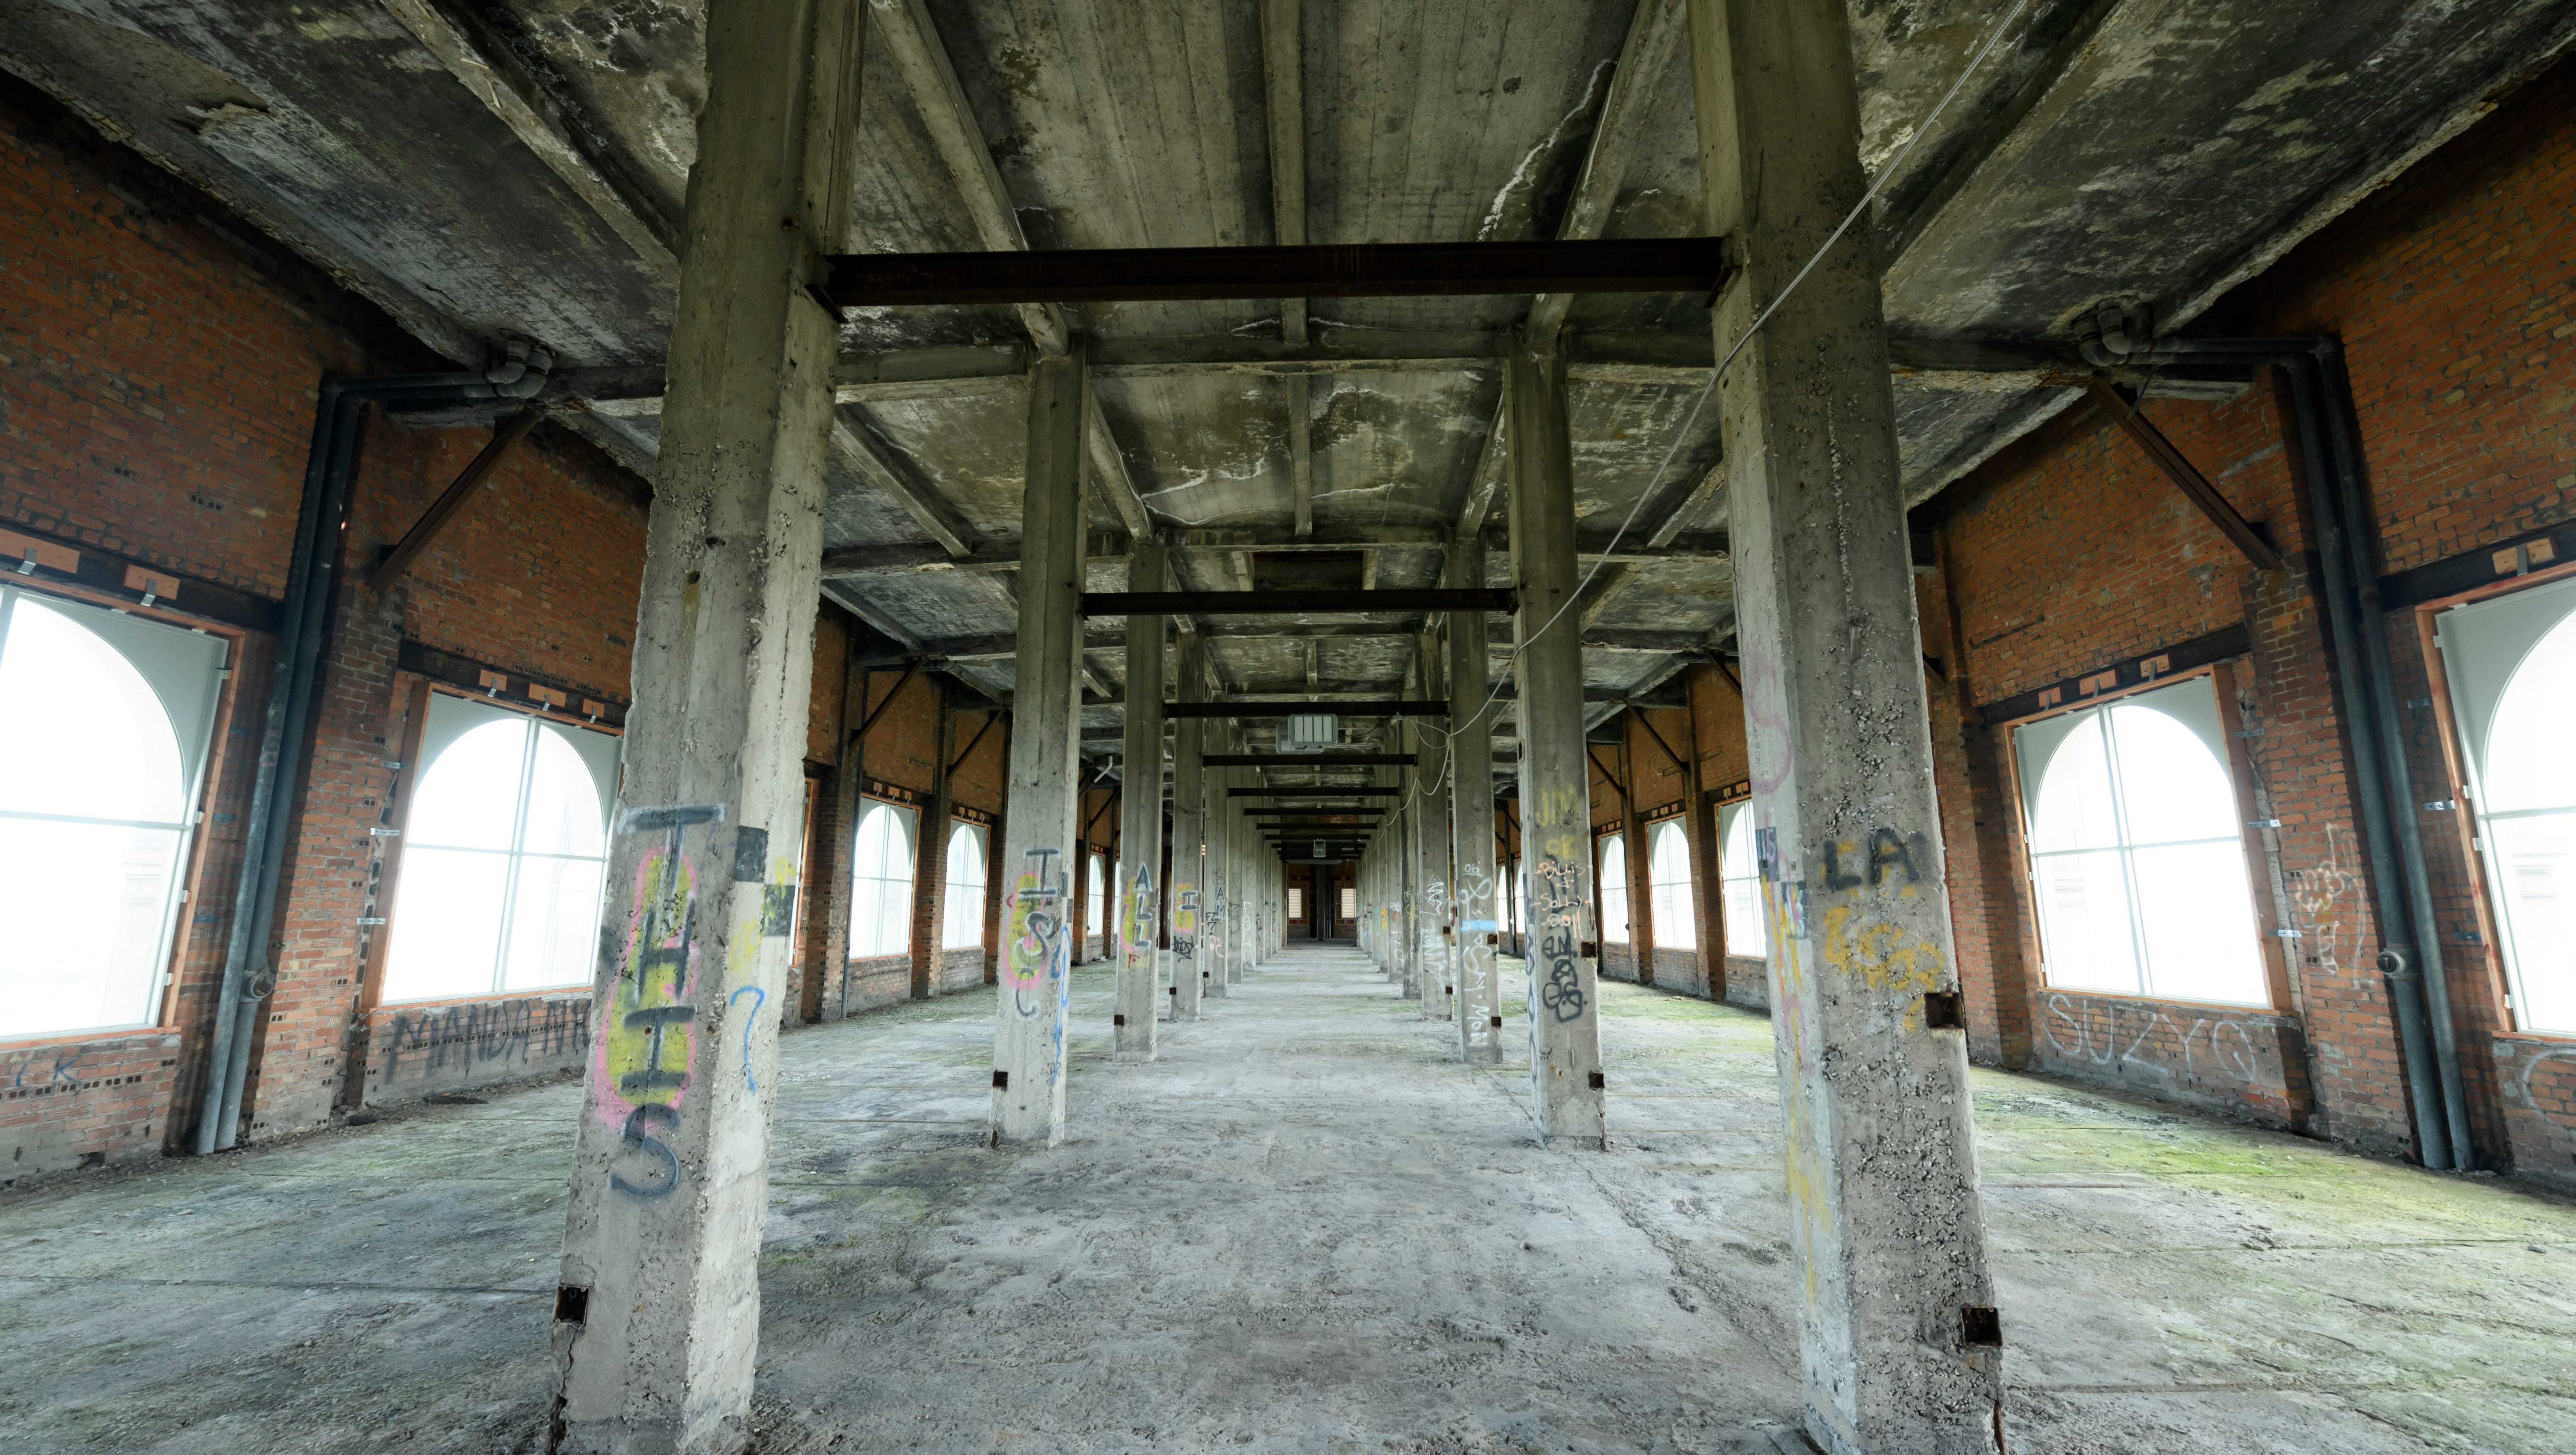 While the public space would occupy the 300,000 square feet on the ground floor of the station and other Corktown properties, 2,500 Ford employees and 2,500 partner employees would occupy the remaining 900,000 square feet come 2022. This is the top floor.